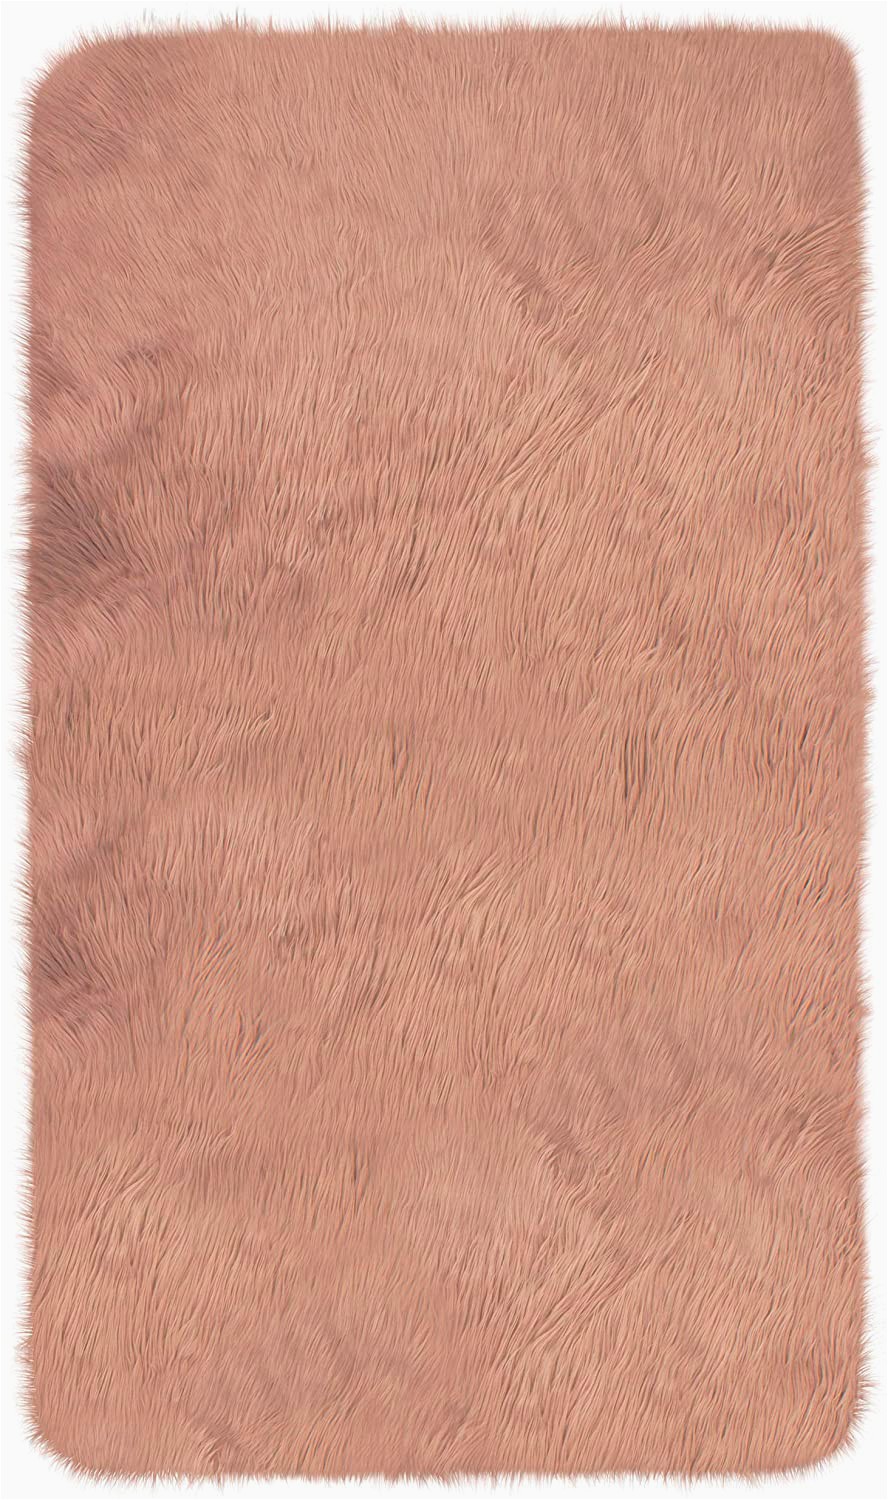 Jean Pierre New York area Rugs Jean Pierre area Rug Polyester Blush 3 X 5 Ft